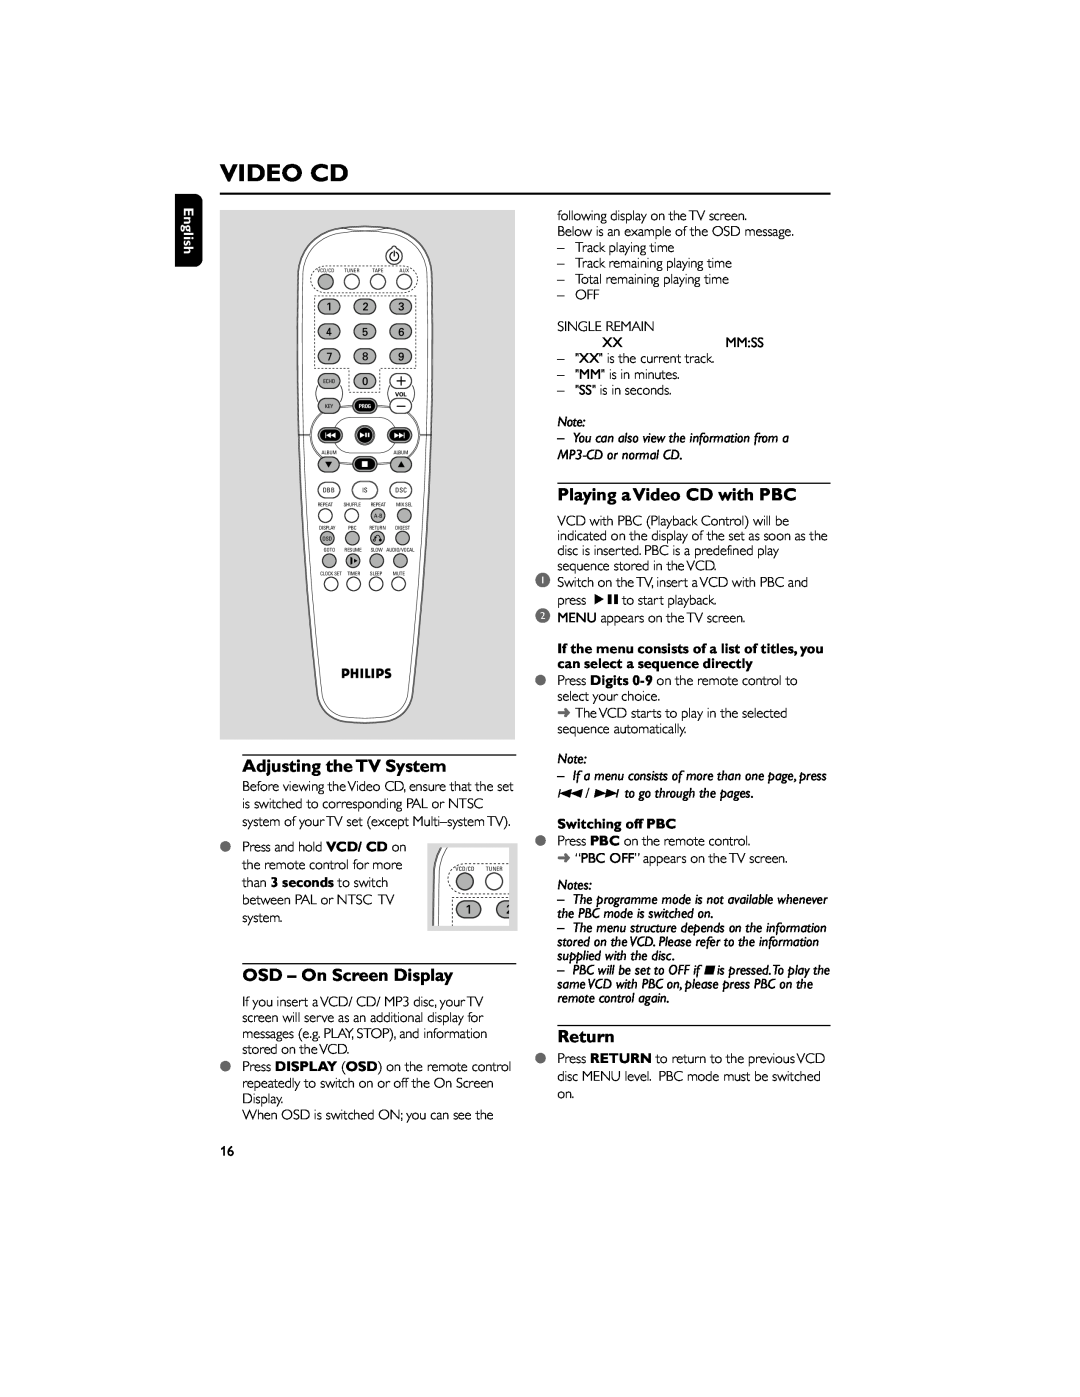 Philips MCV250/21 Video Cd, Adjusting the TV System, OSD – On Screen Display, Playing a Video CD with PBC, Return, English 